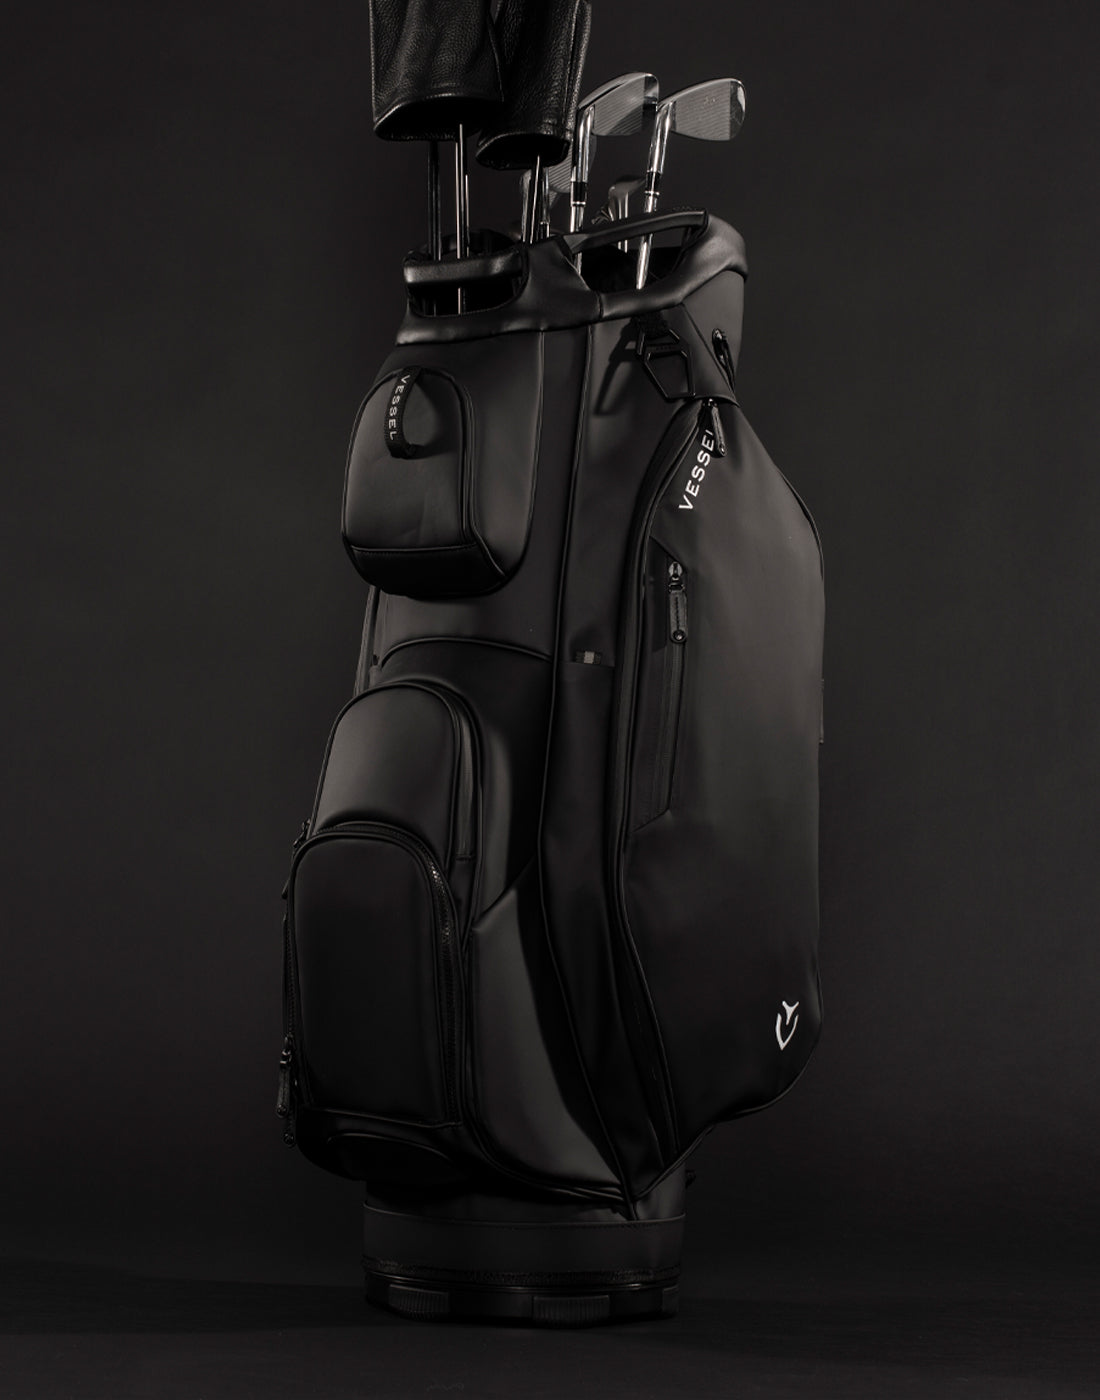 Black golf cart bag filled with golf clubs propped upright in black studio